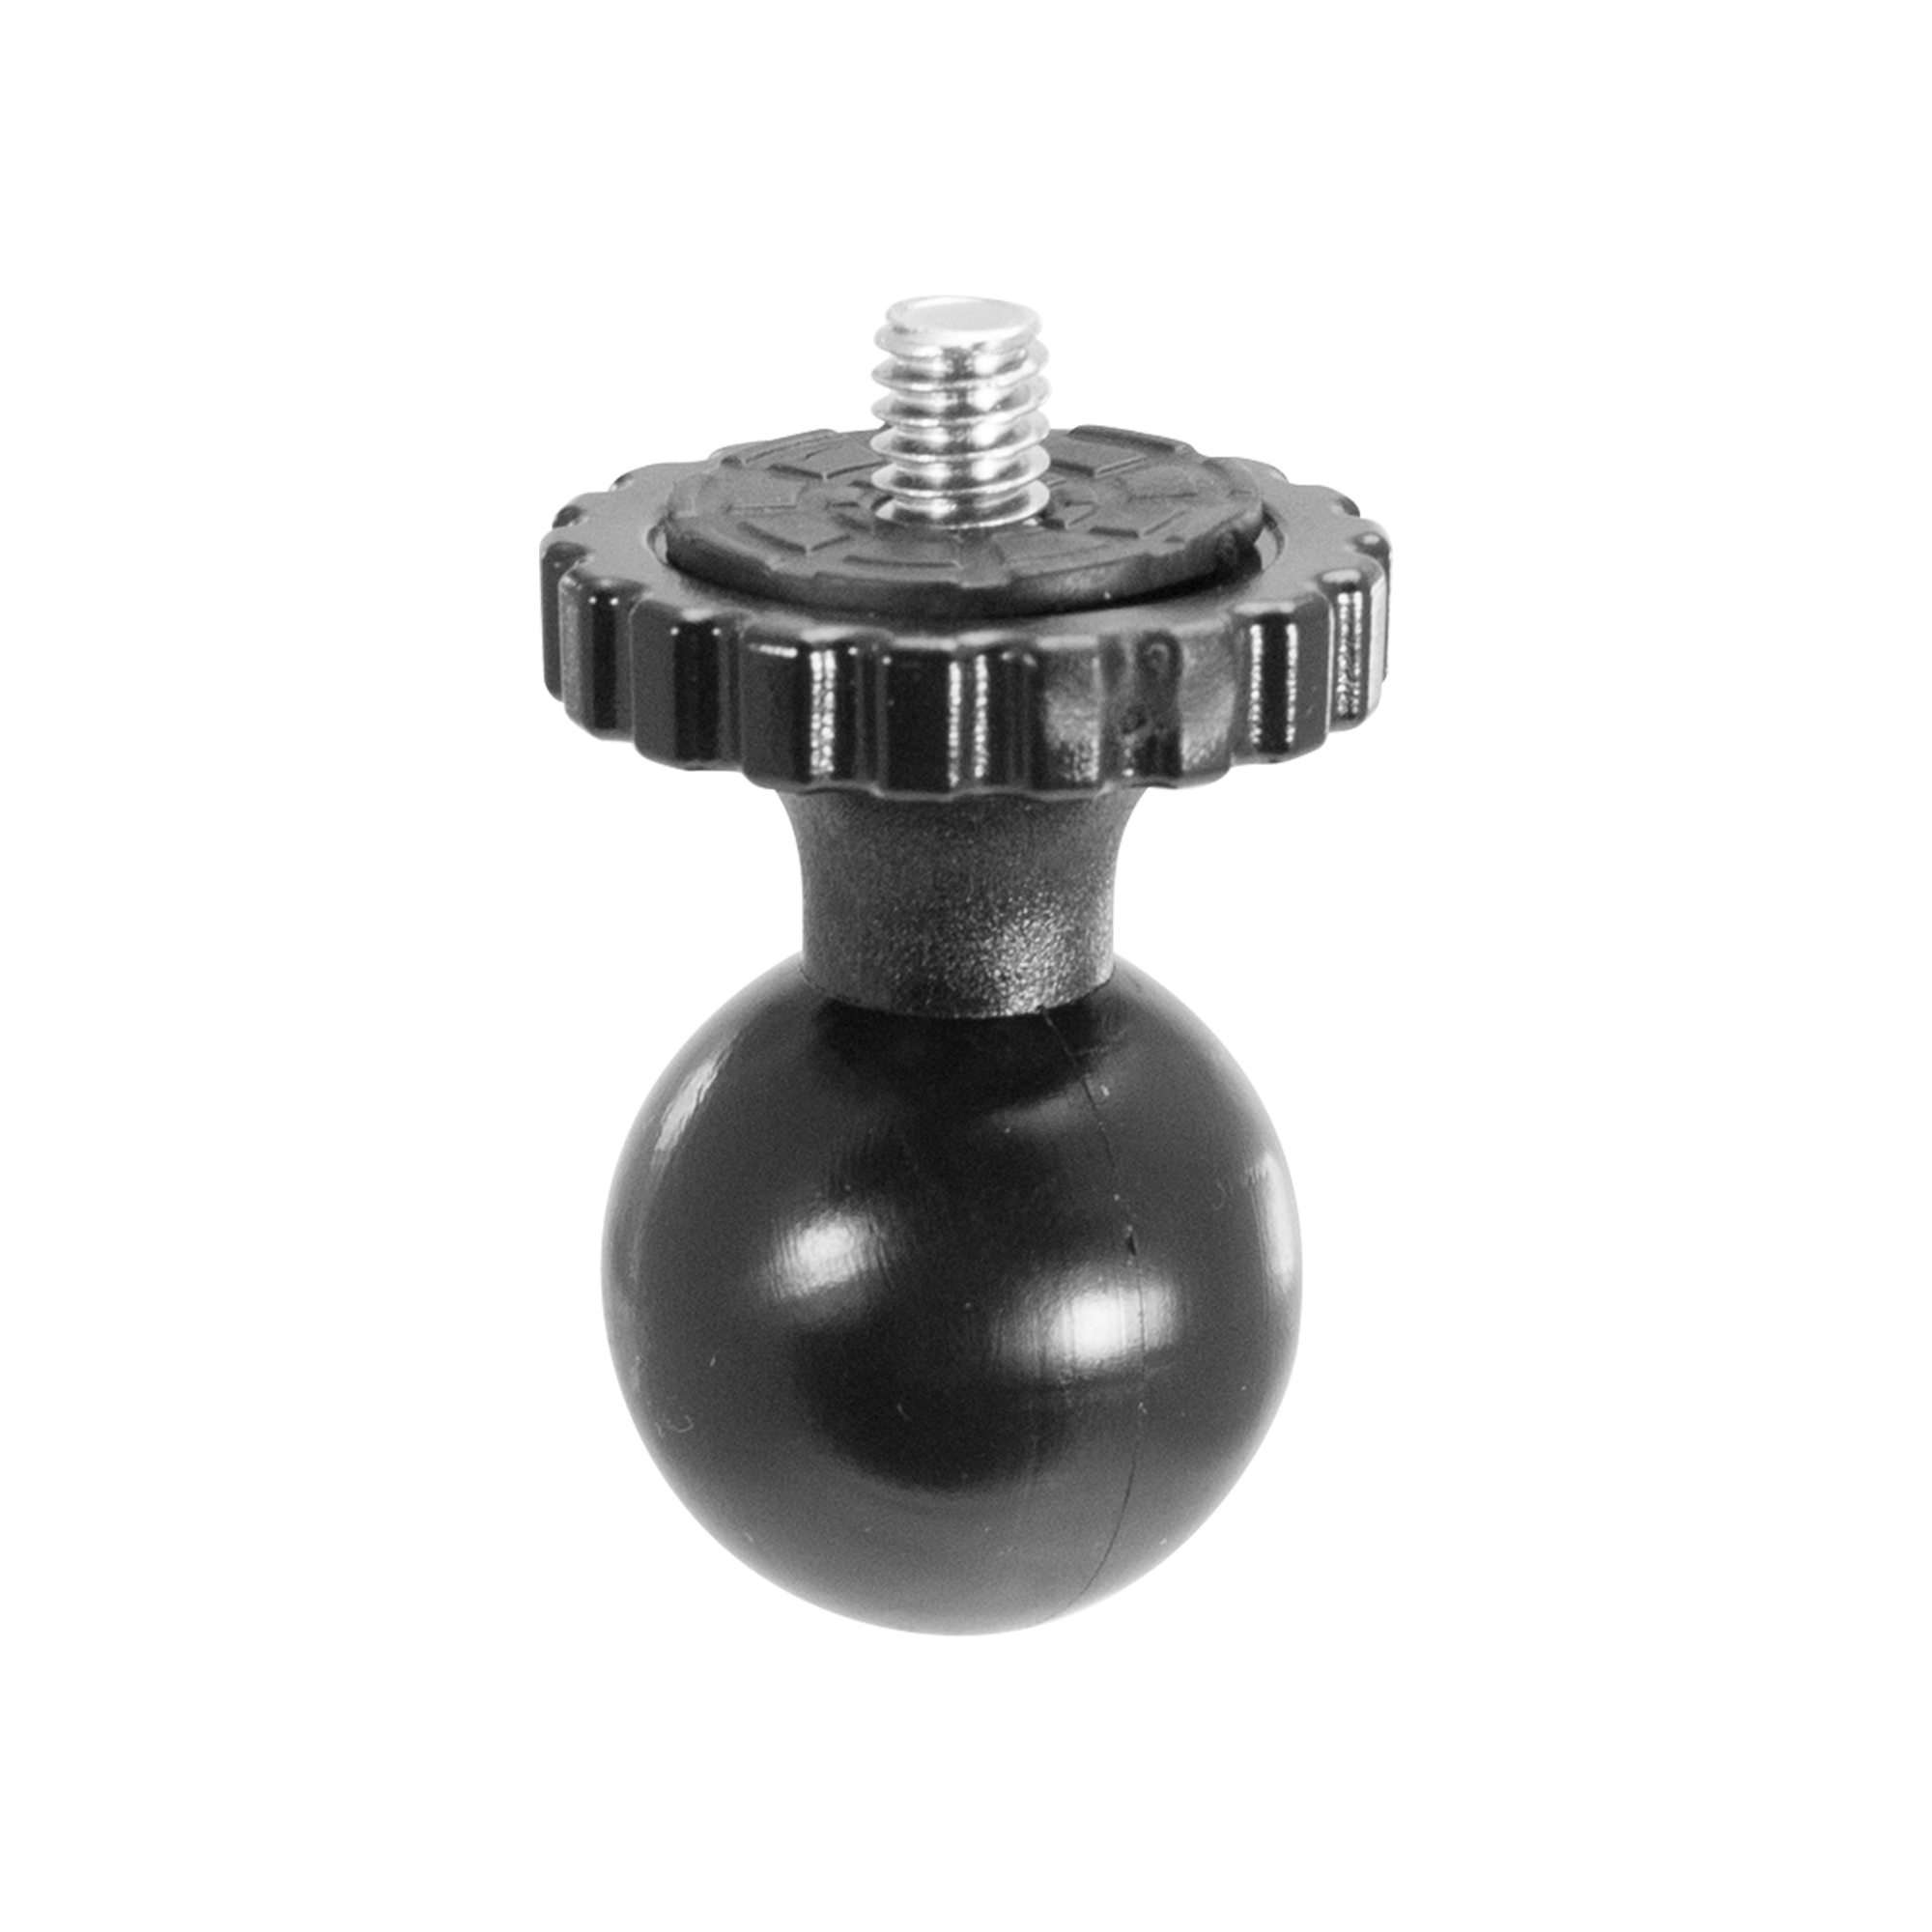 iBOLT™ 25mm/ 1 inch Ball to ¼ 20 Camera Screw Mount